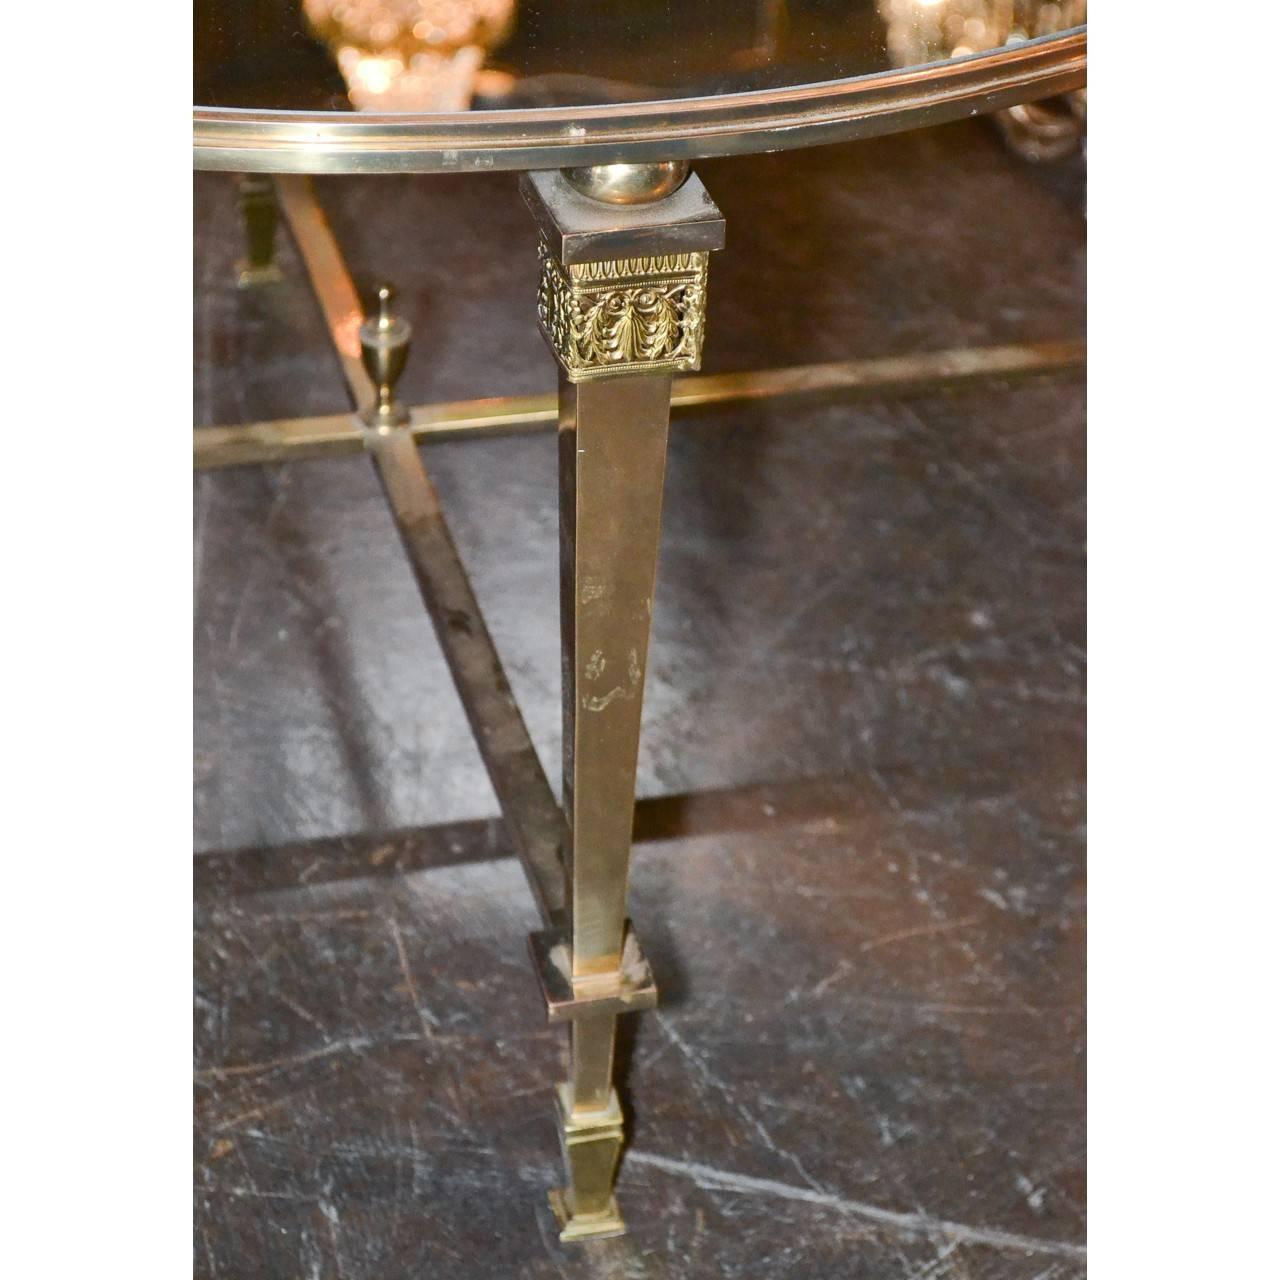 These midcentury neoclassic coffee/cocktail tables are high in demand today with decorators!
This beauty has a mirrored top, circa 1950.

Measure: 32.5 inches wide x 19 inches height.

 